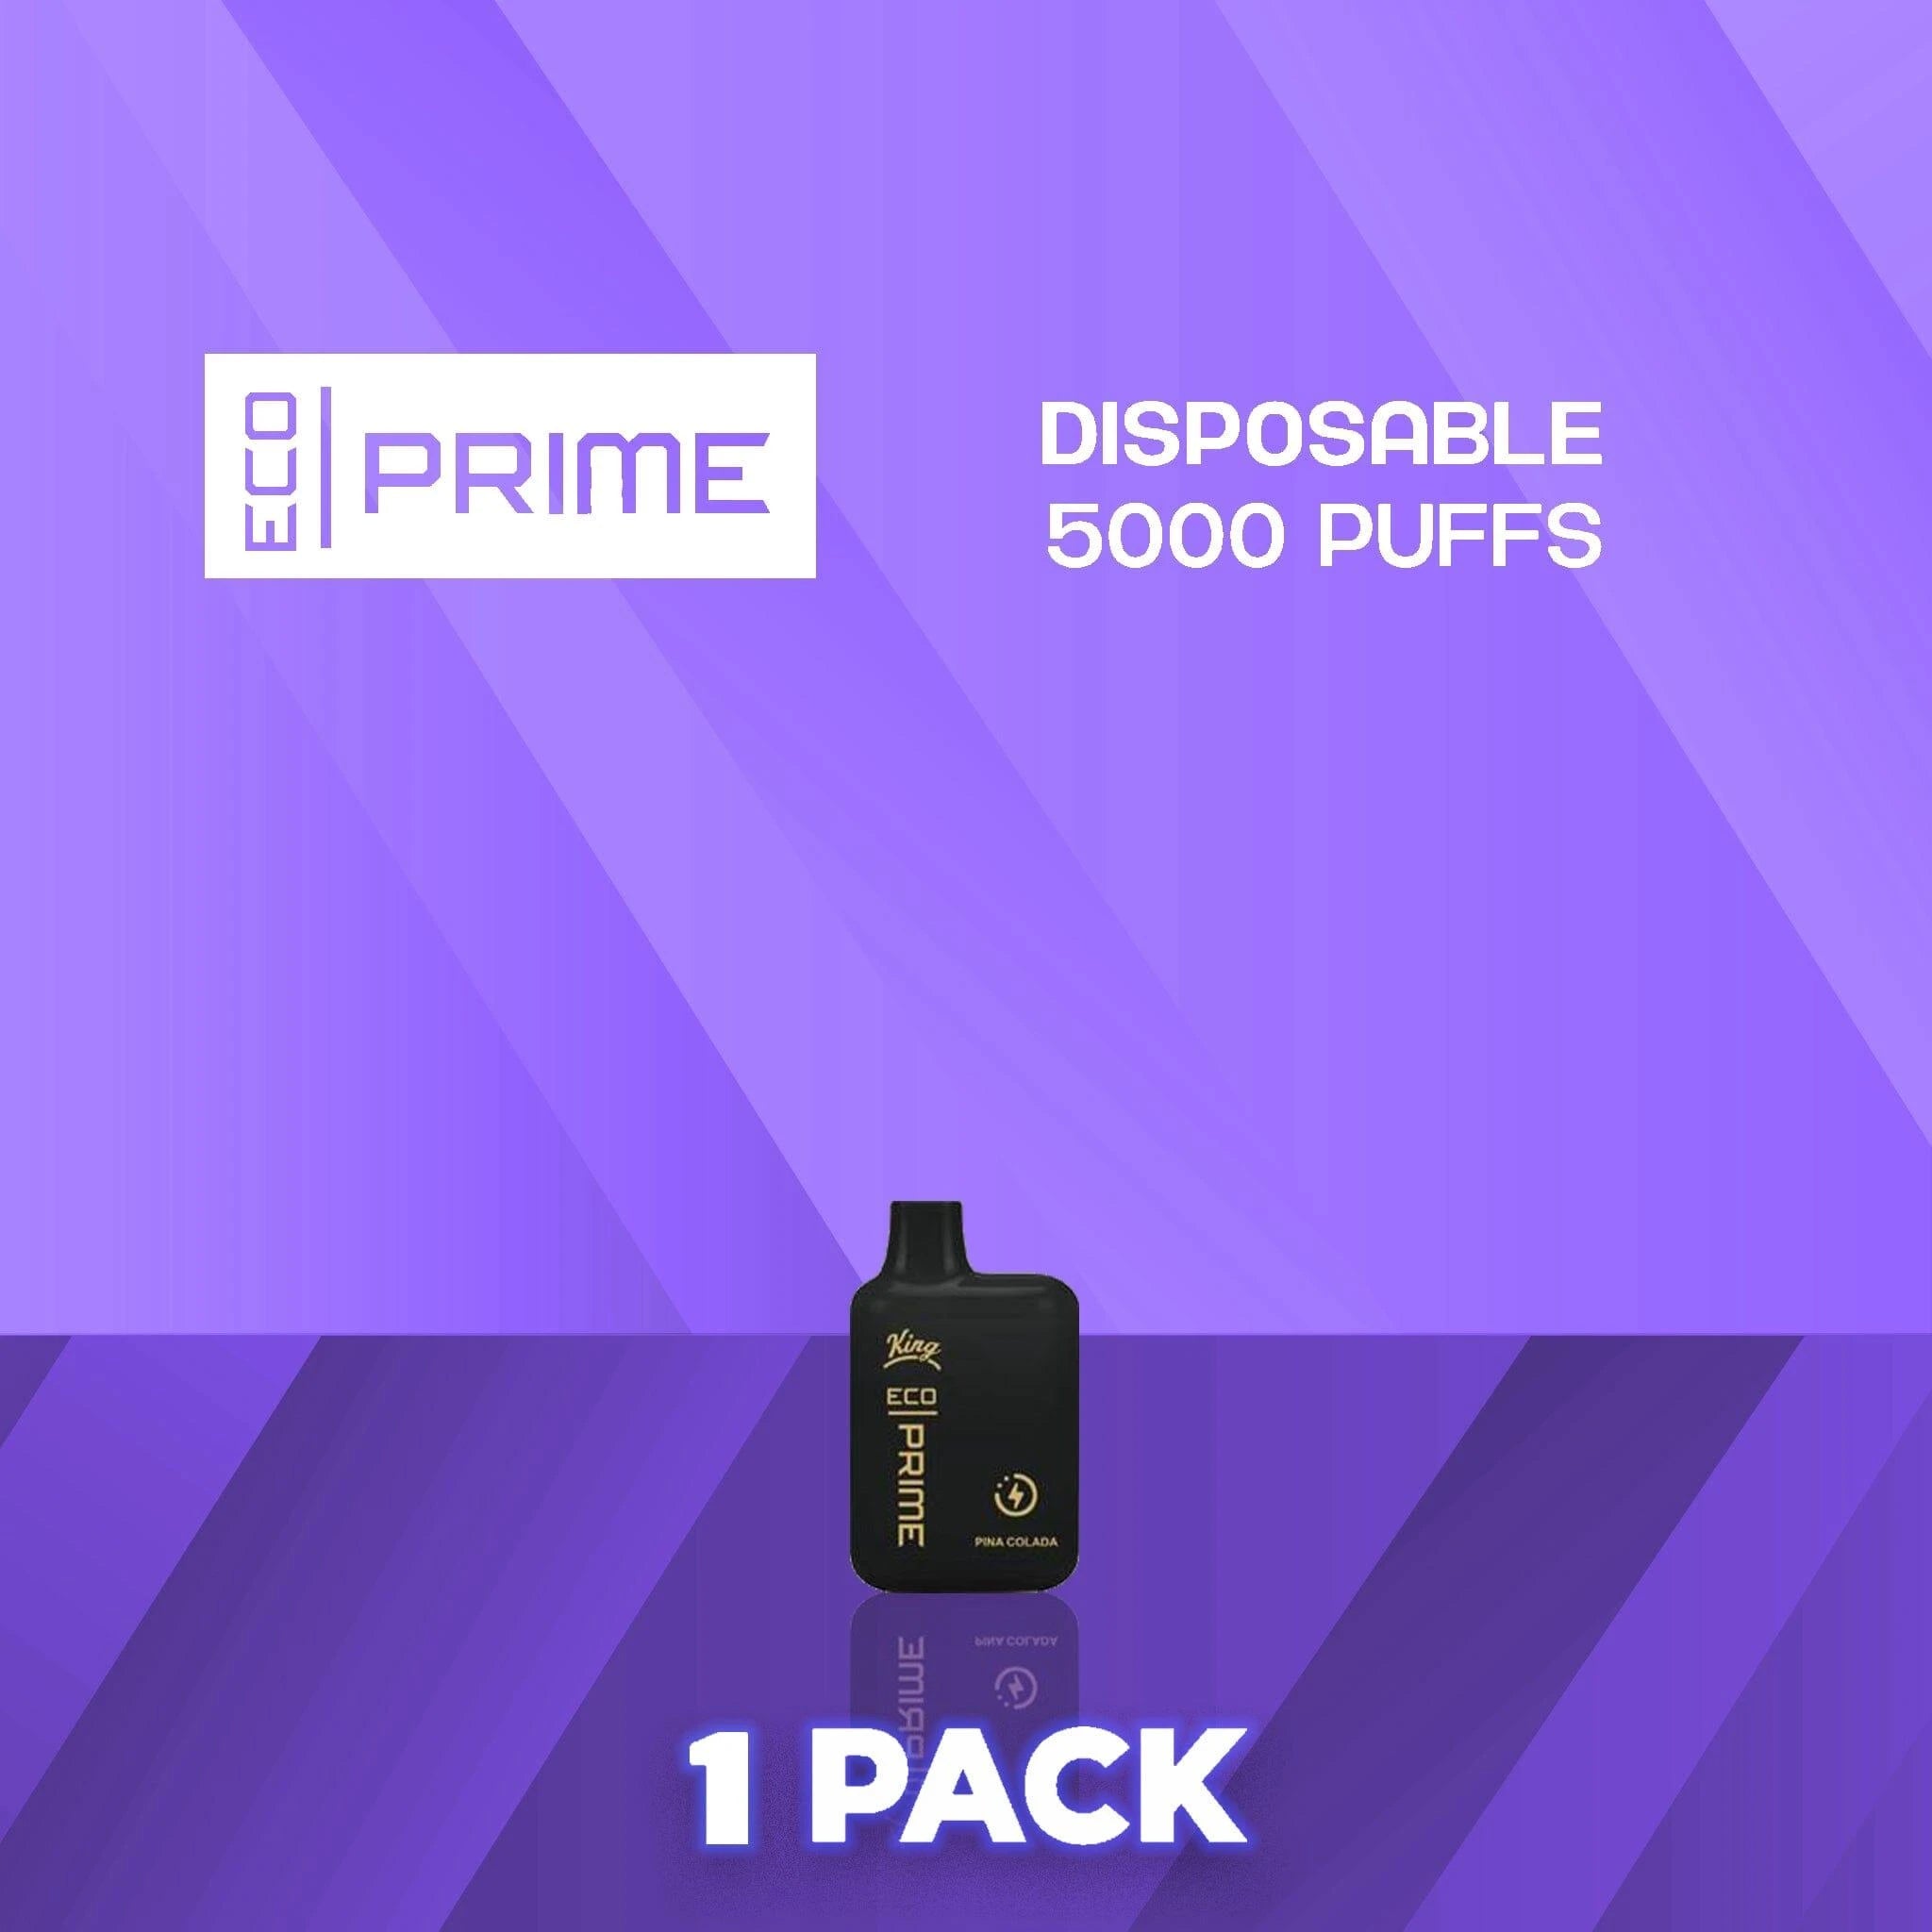 Eco Prime 5000 Puffs Disposable Vape - 1 Pack